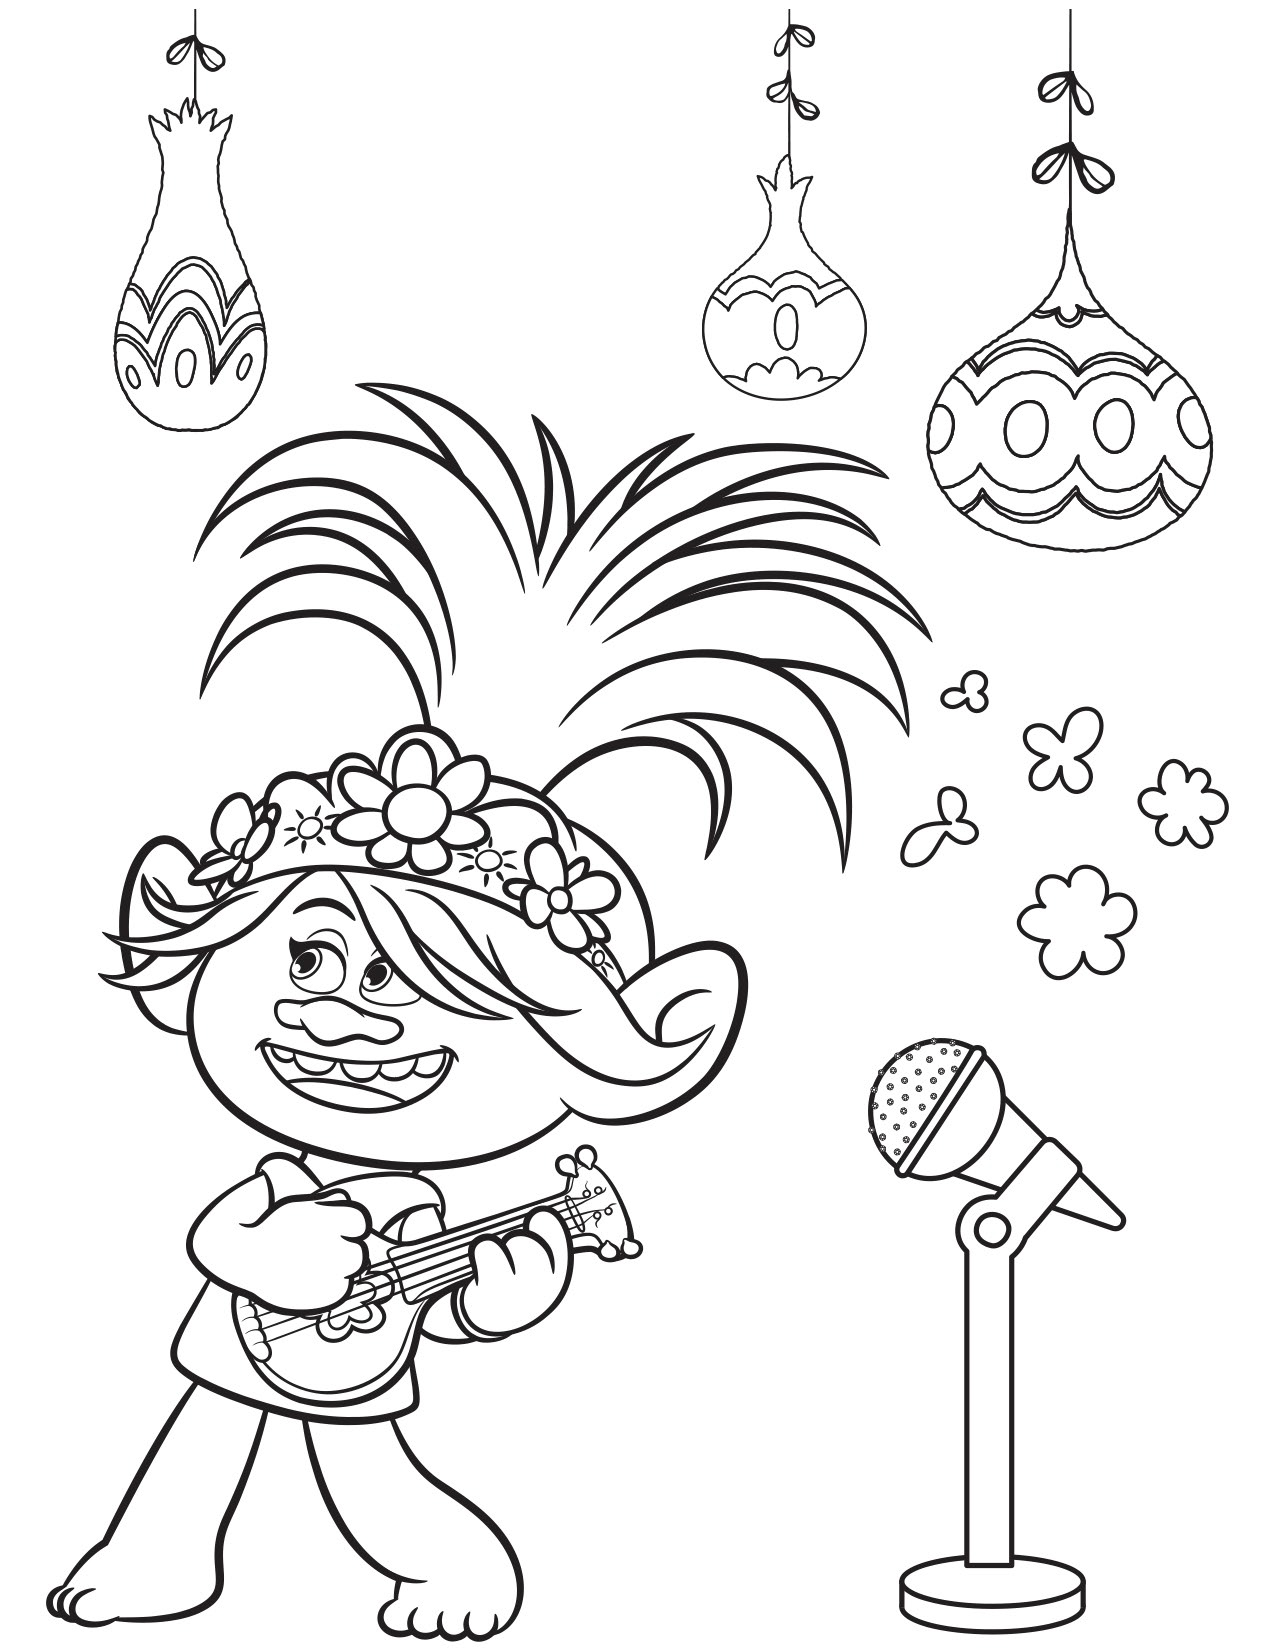 Trolls World Tour coloring pages   YouLoveIt.com